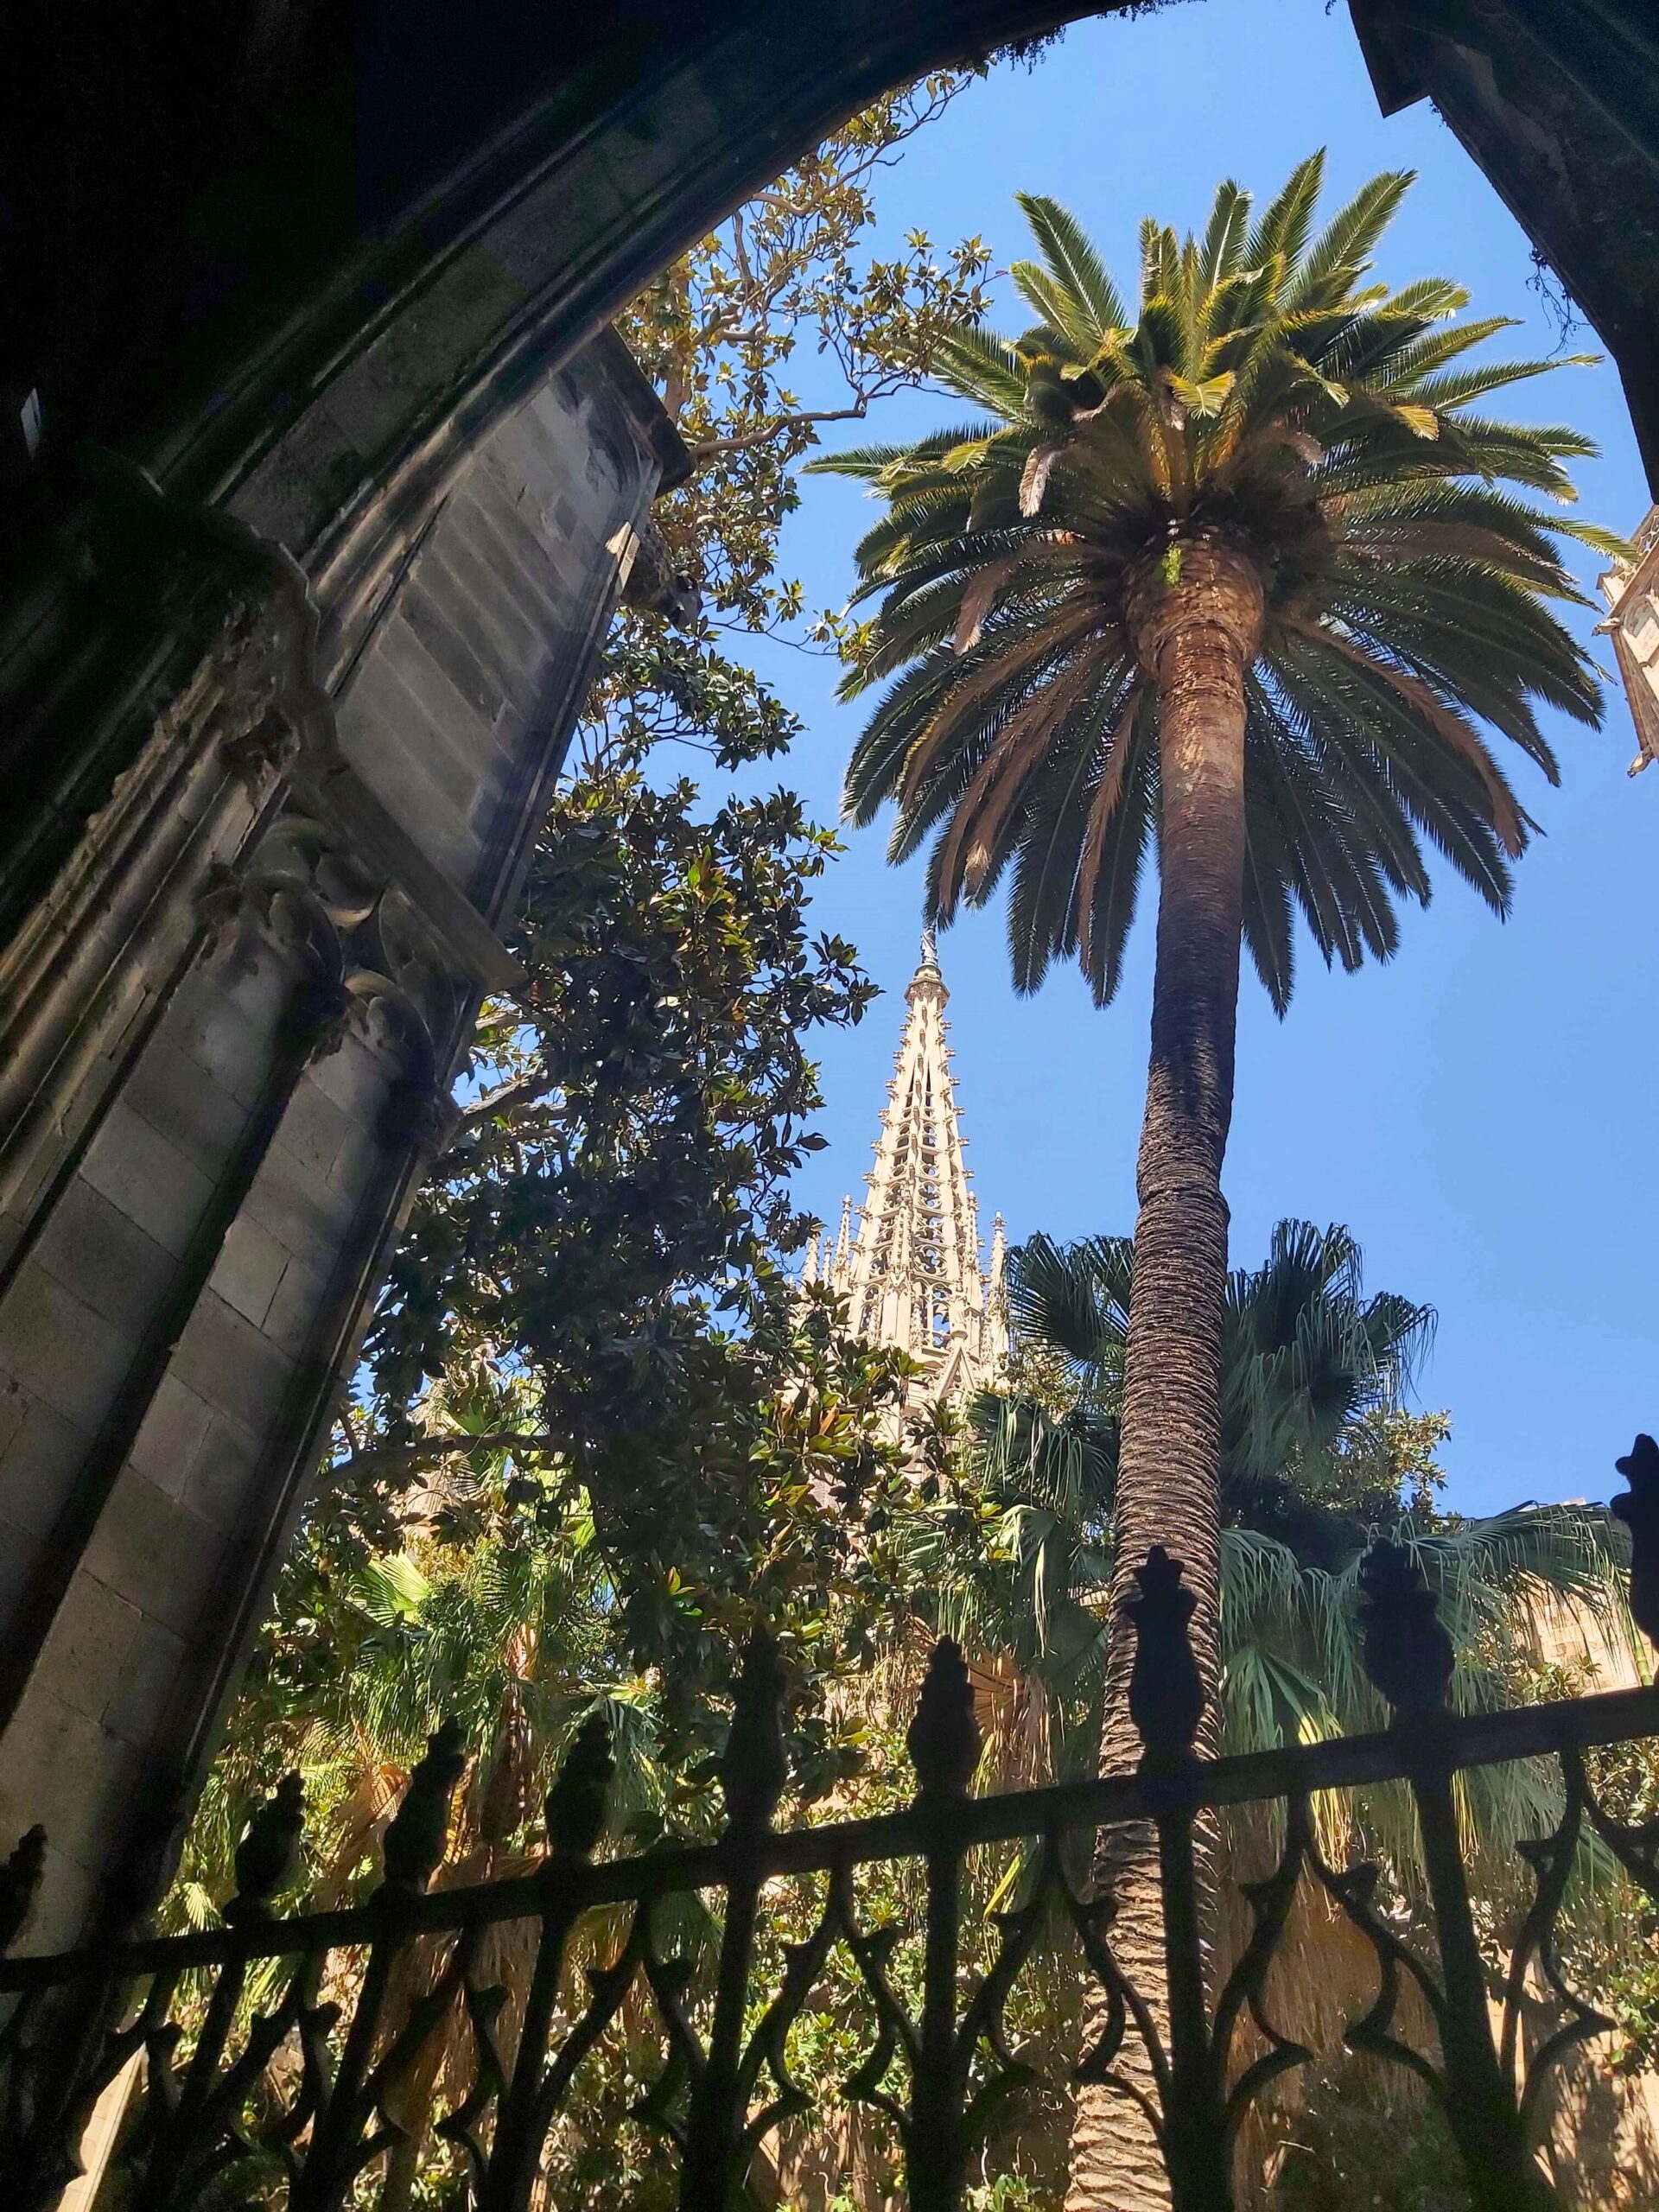 A view of a palm tree and cathedral spire through a cloister arch in Barcelona Cathedral, Spain